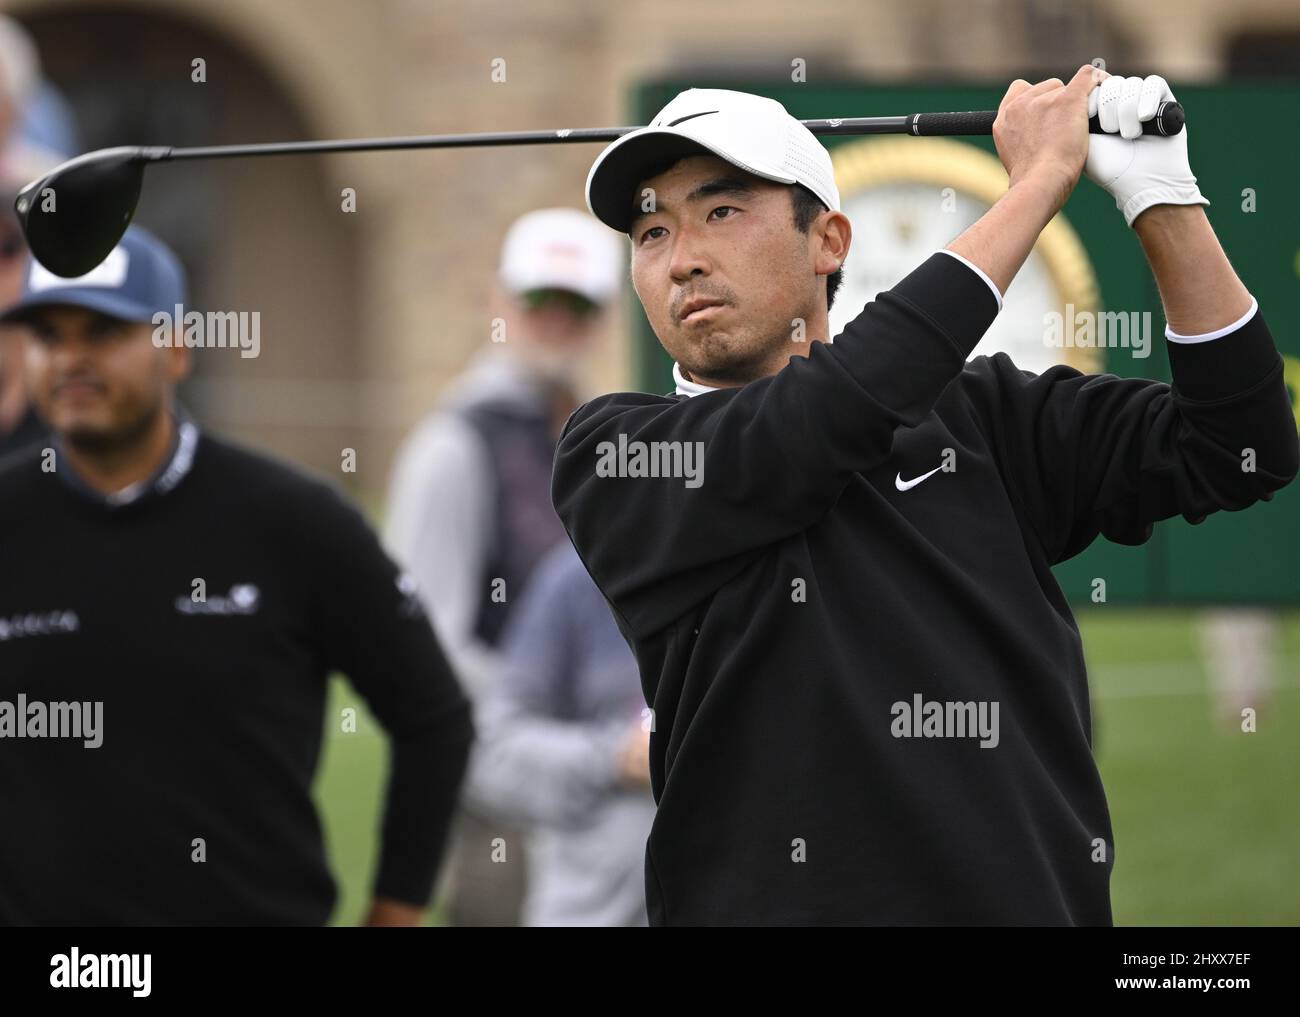 Ponte Vedra Beach, United States. 14th Mar, 2022. Doug Ghim of the United States tees off on the 1st hole in the final round of the 2022 Players PGA Championship on the Stadium Course at TPC Sawgrass in Ponte Vedra Beach, Florida on Monday, March 14, 2022. The golf tournament has been extended one day due to weather delays. Photo by Joe Marino/UPI Credit: UPI/Alamy Live News Stock Photo